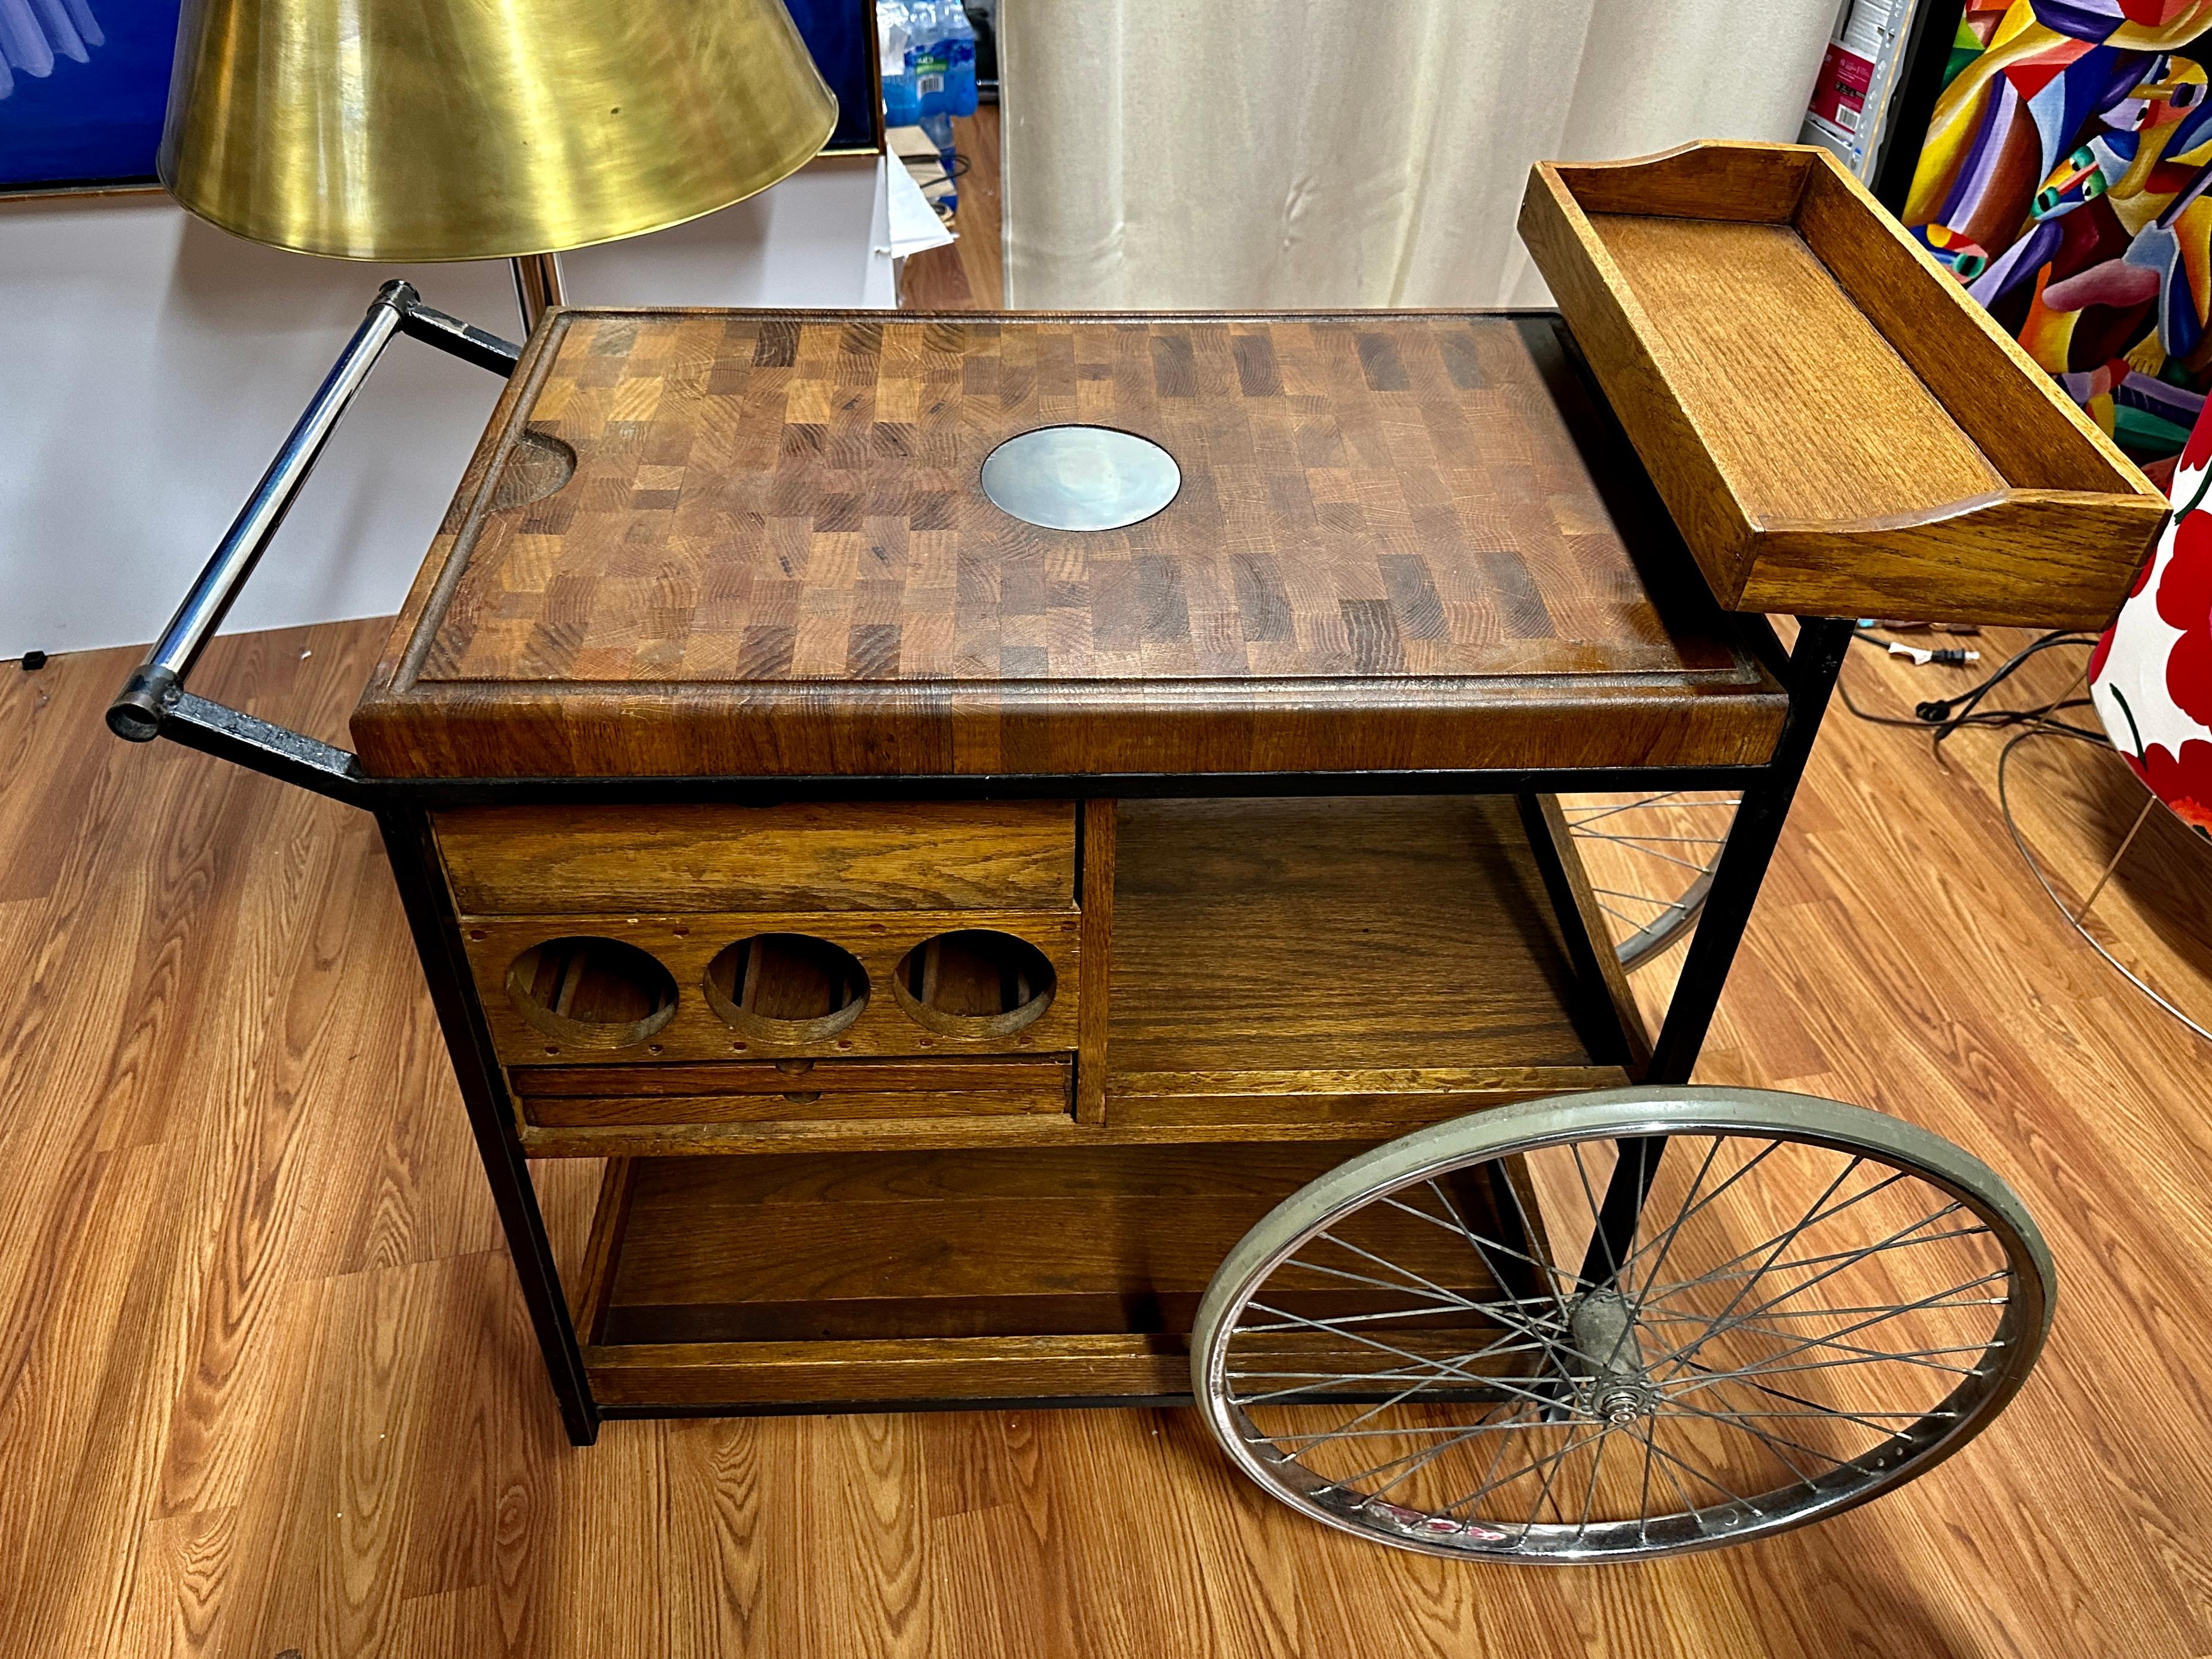 Great looking mid-century bar cart designed by Arthur Umanoff. Distinctive large pair of Rear wheels and a small front wheel for “steering.” Thick Butcher block top with oak trays and sides. The frame is painted black iron. An unusual design by